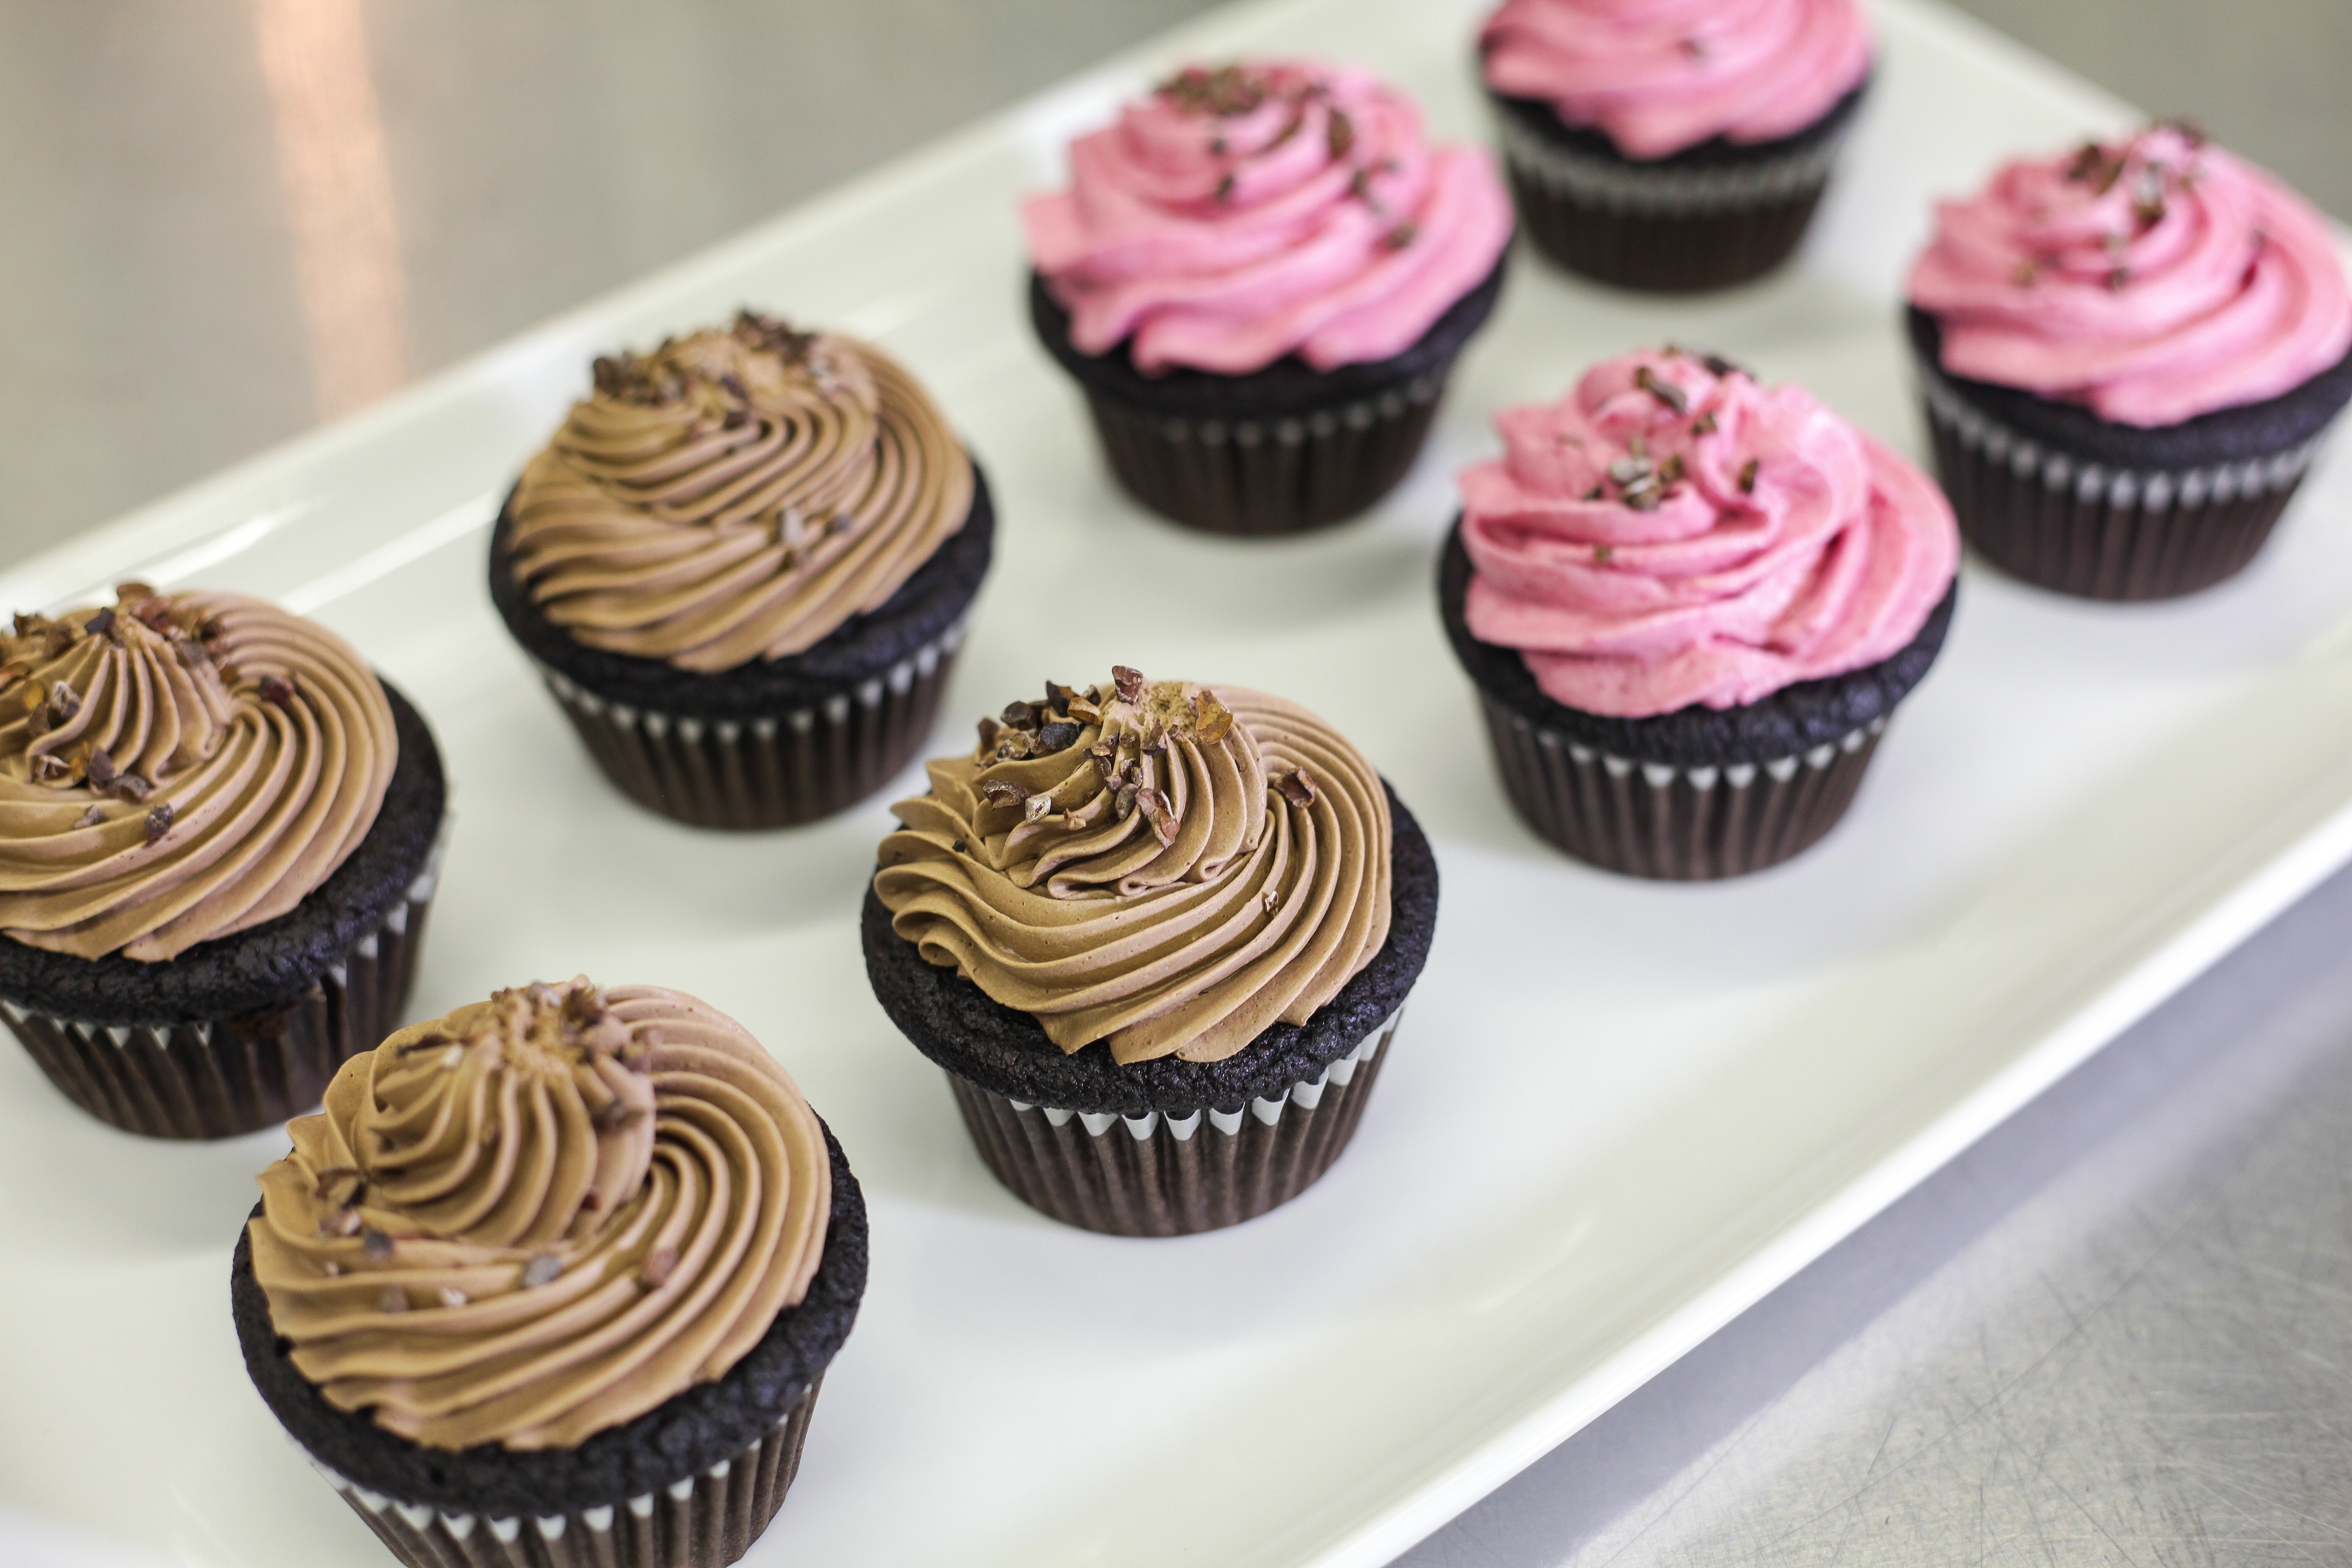 10 Dairy-Free Cupcakes and Muffins For Your Next Bake Sale